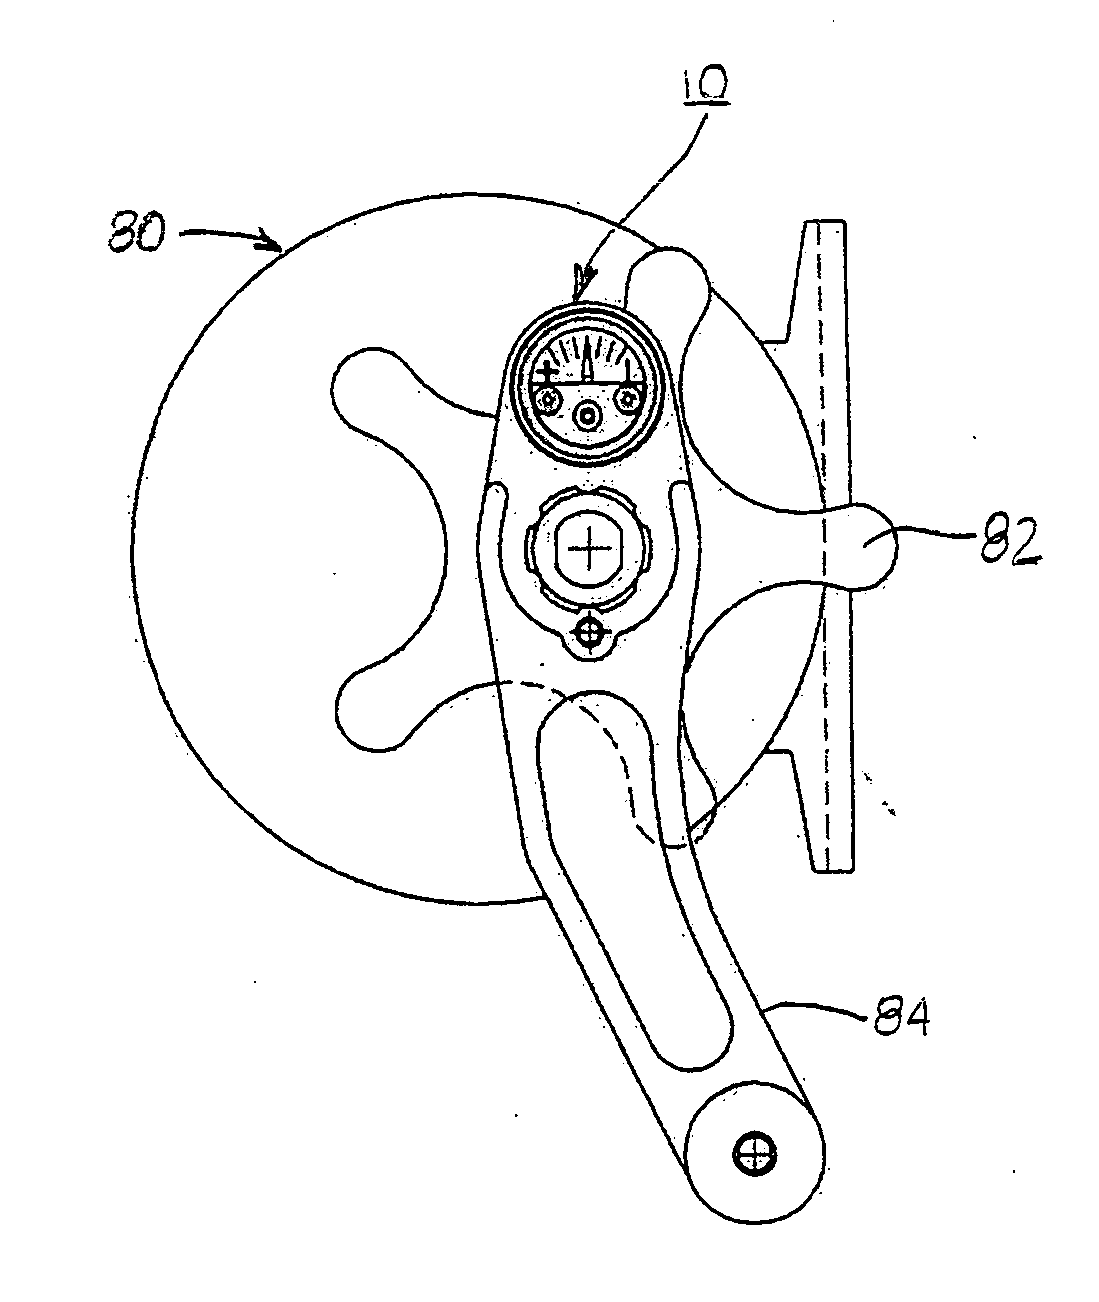 Relative line tension indicator and methods for fishing reels and the like